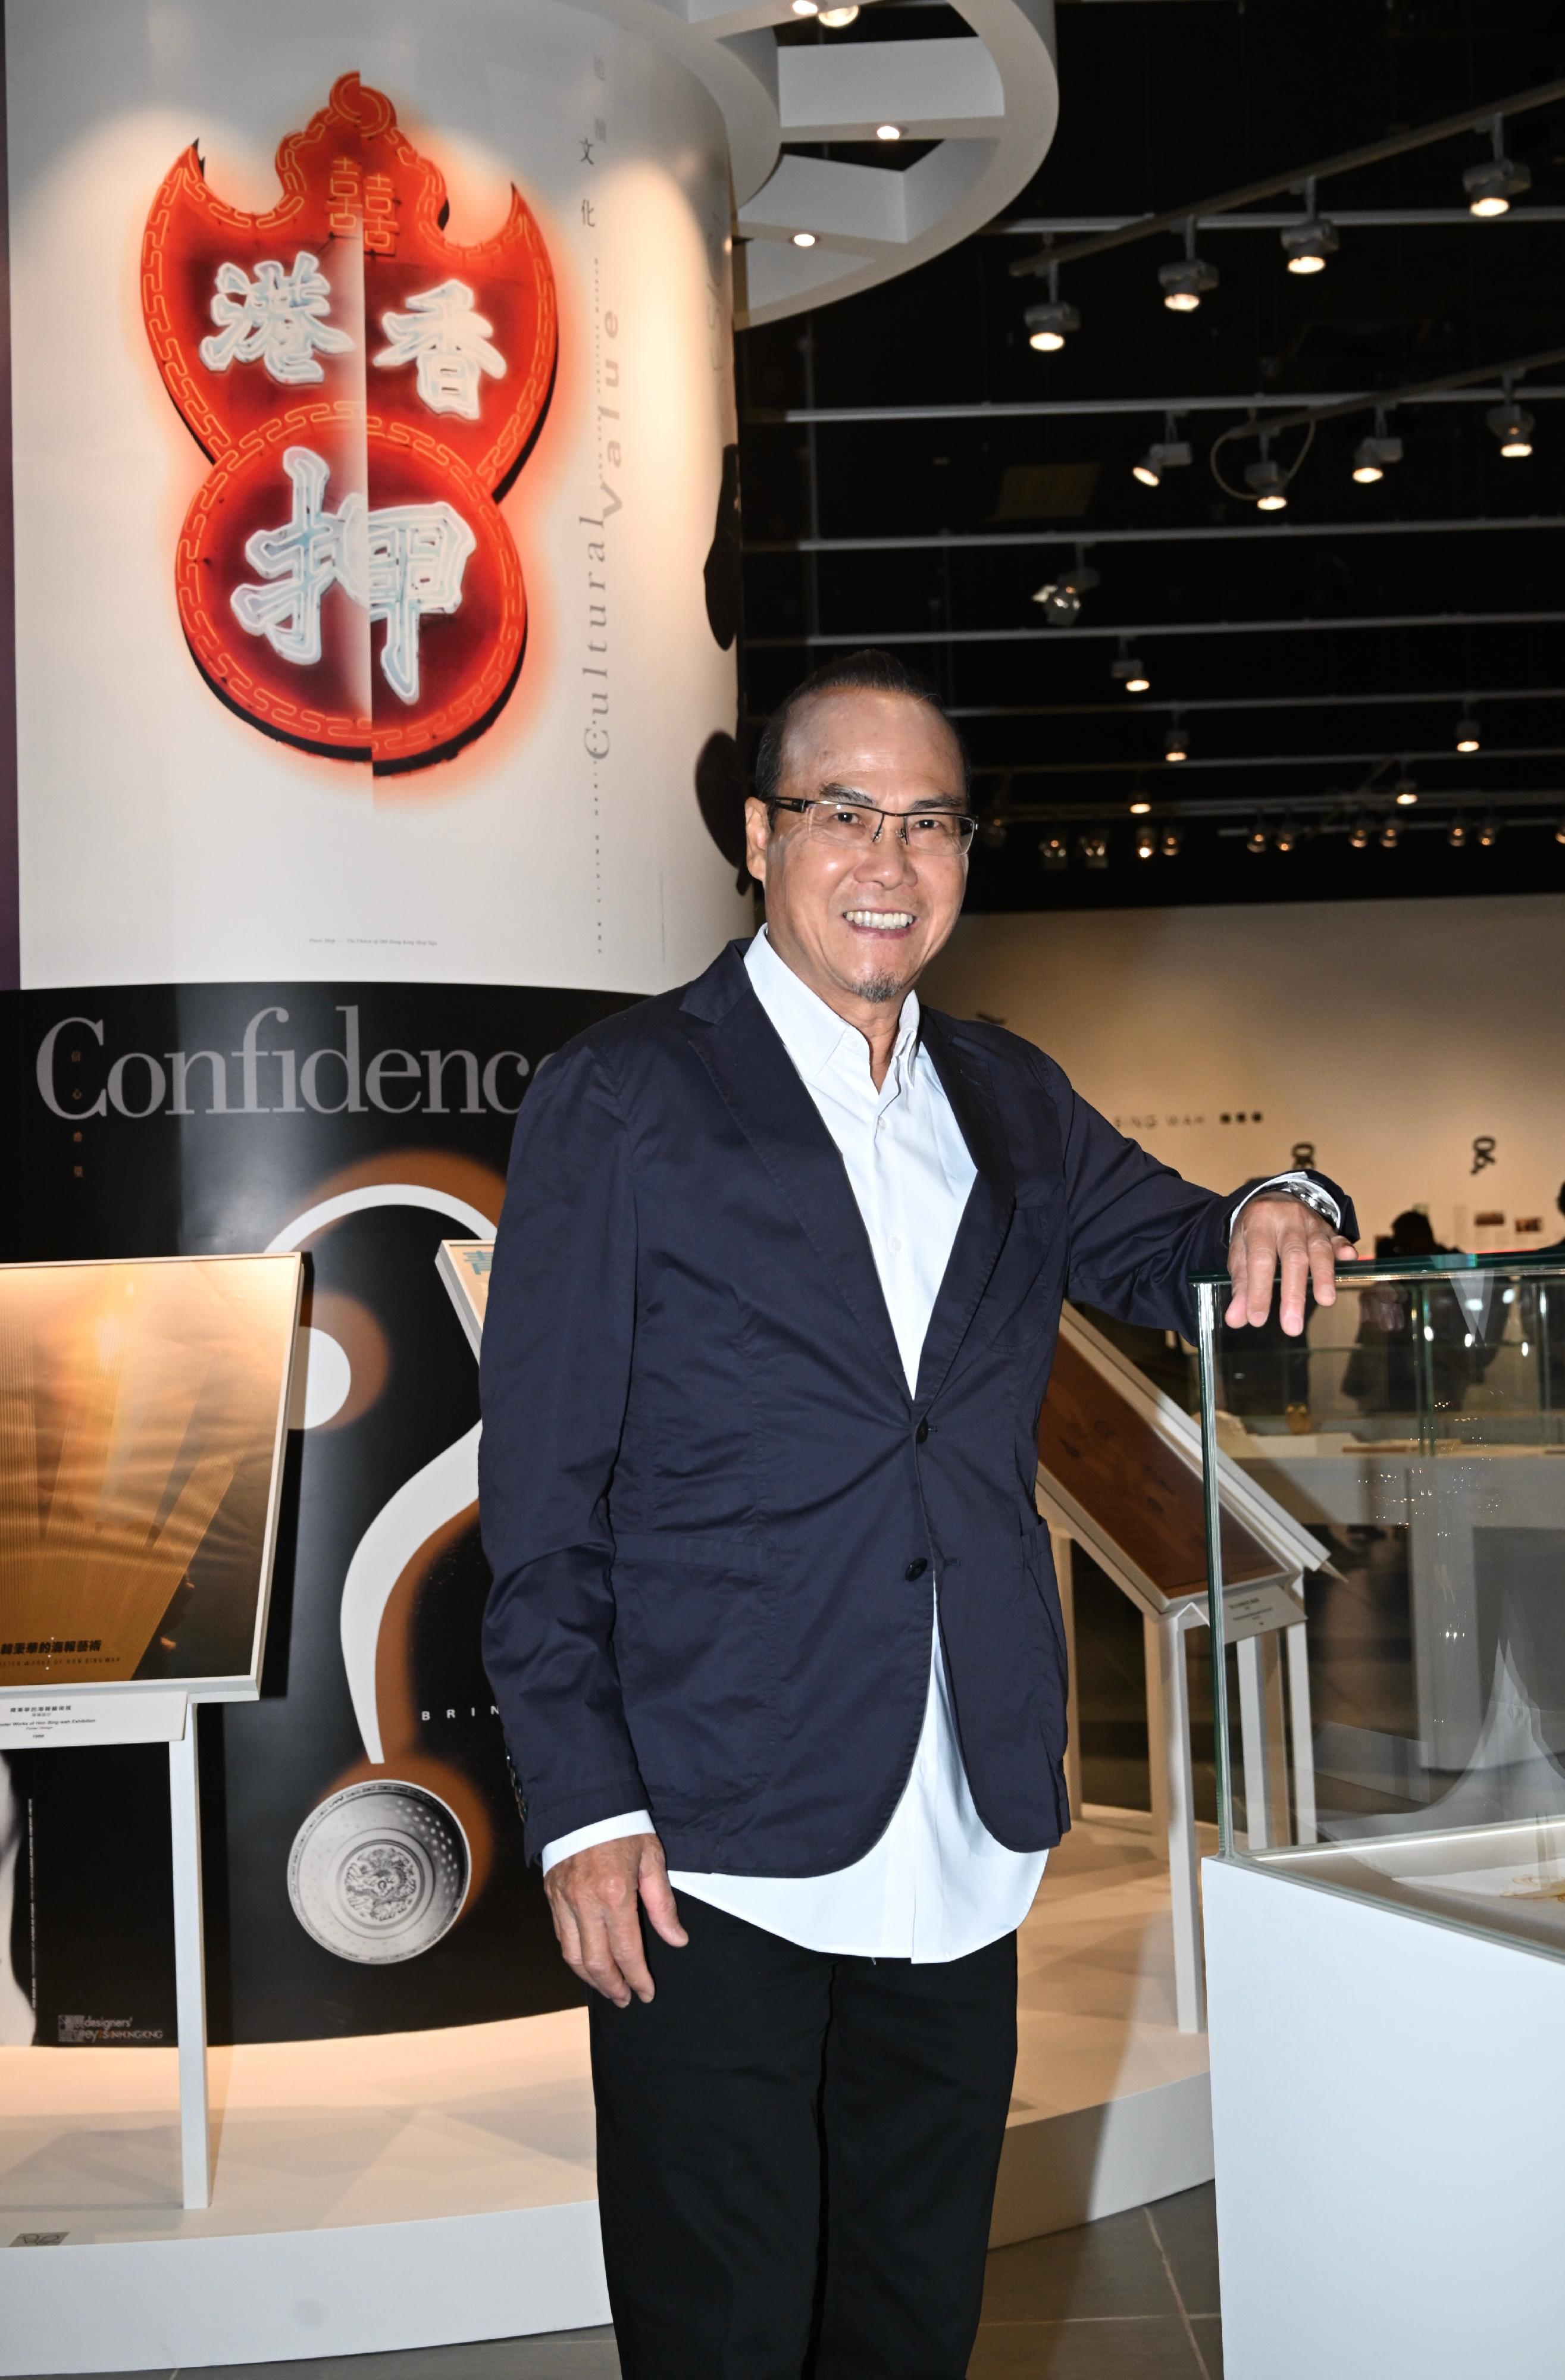 The opening ceremony for "The Reflection - Art & Design of Hon Bing-wah" exhibition was held today (November 14) at the Hong Kong Heritage Museum. The exhibition features over a hundred selected works and sketches created by designer and artist Professor Hon Bing-wah since the 1970s. Photo shows Professor Hon.